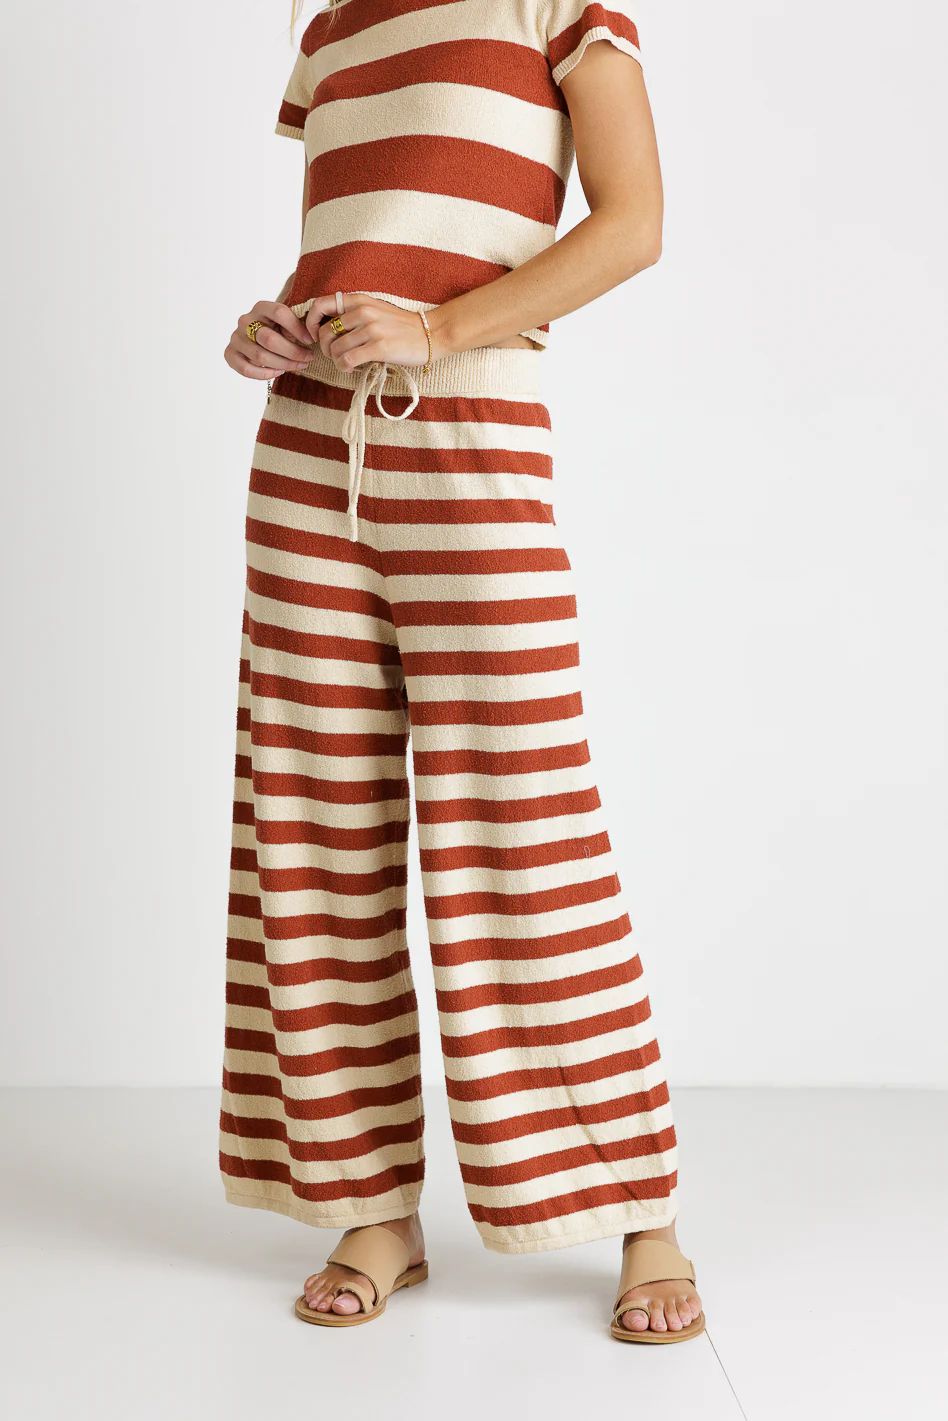 Charly Striped Pants in Rust | Bohme